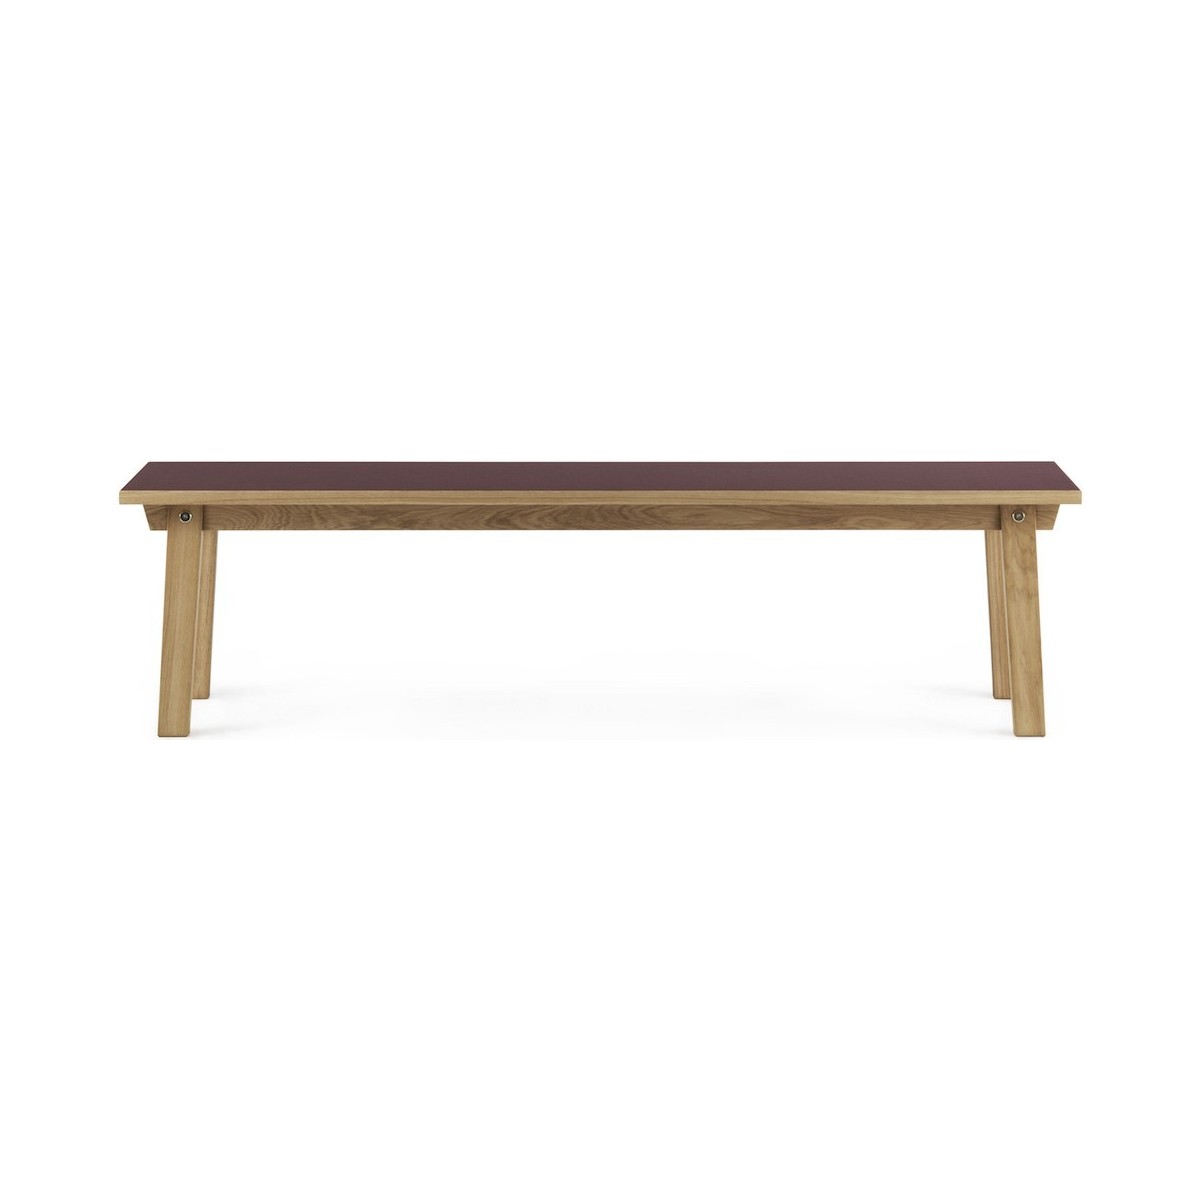 SOLD OUT Burgundy - 38x160cm - Slice bench